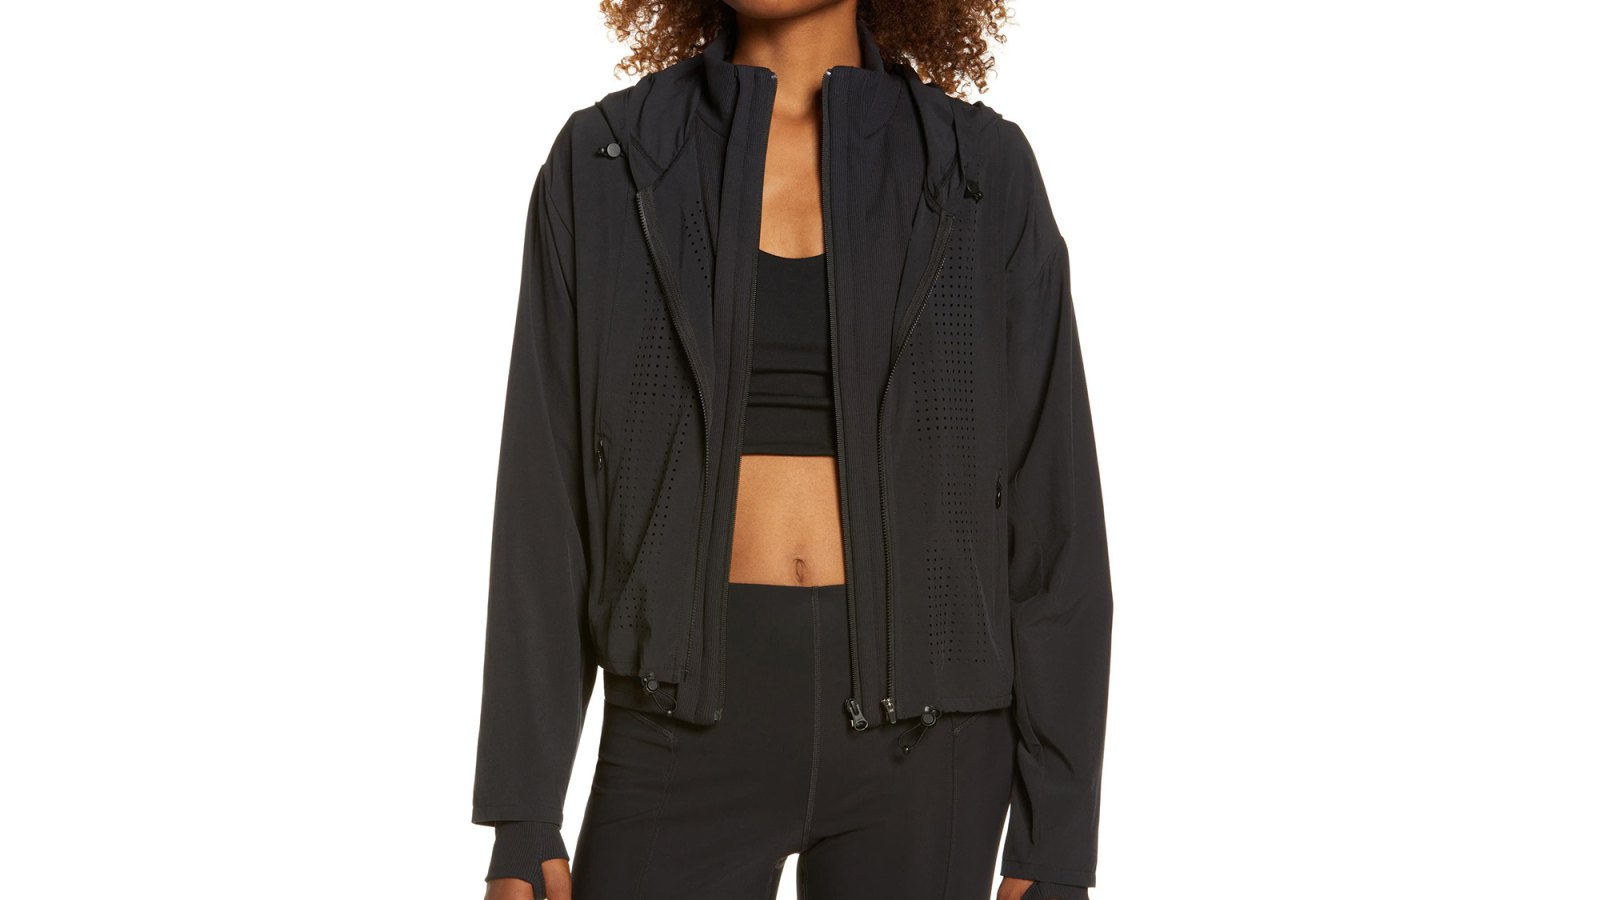 Zella 'Perfect' Double-Layered Jacket Is 35% Off at Nordstrom